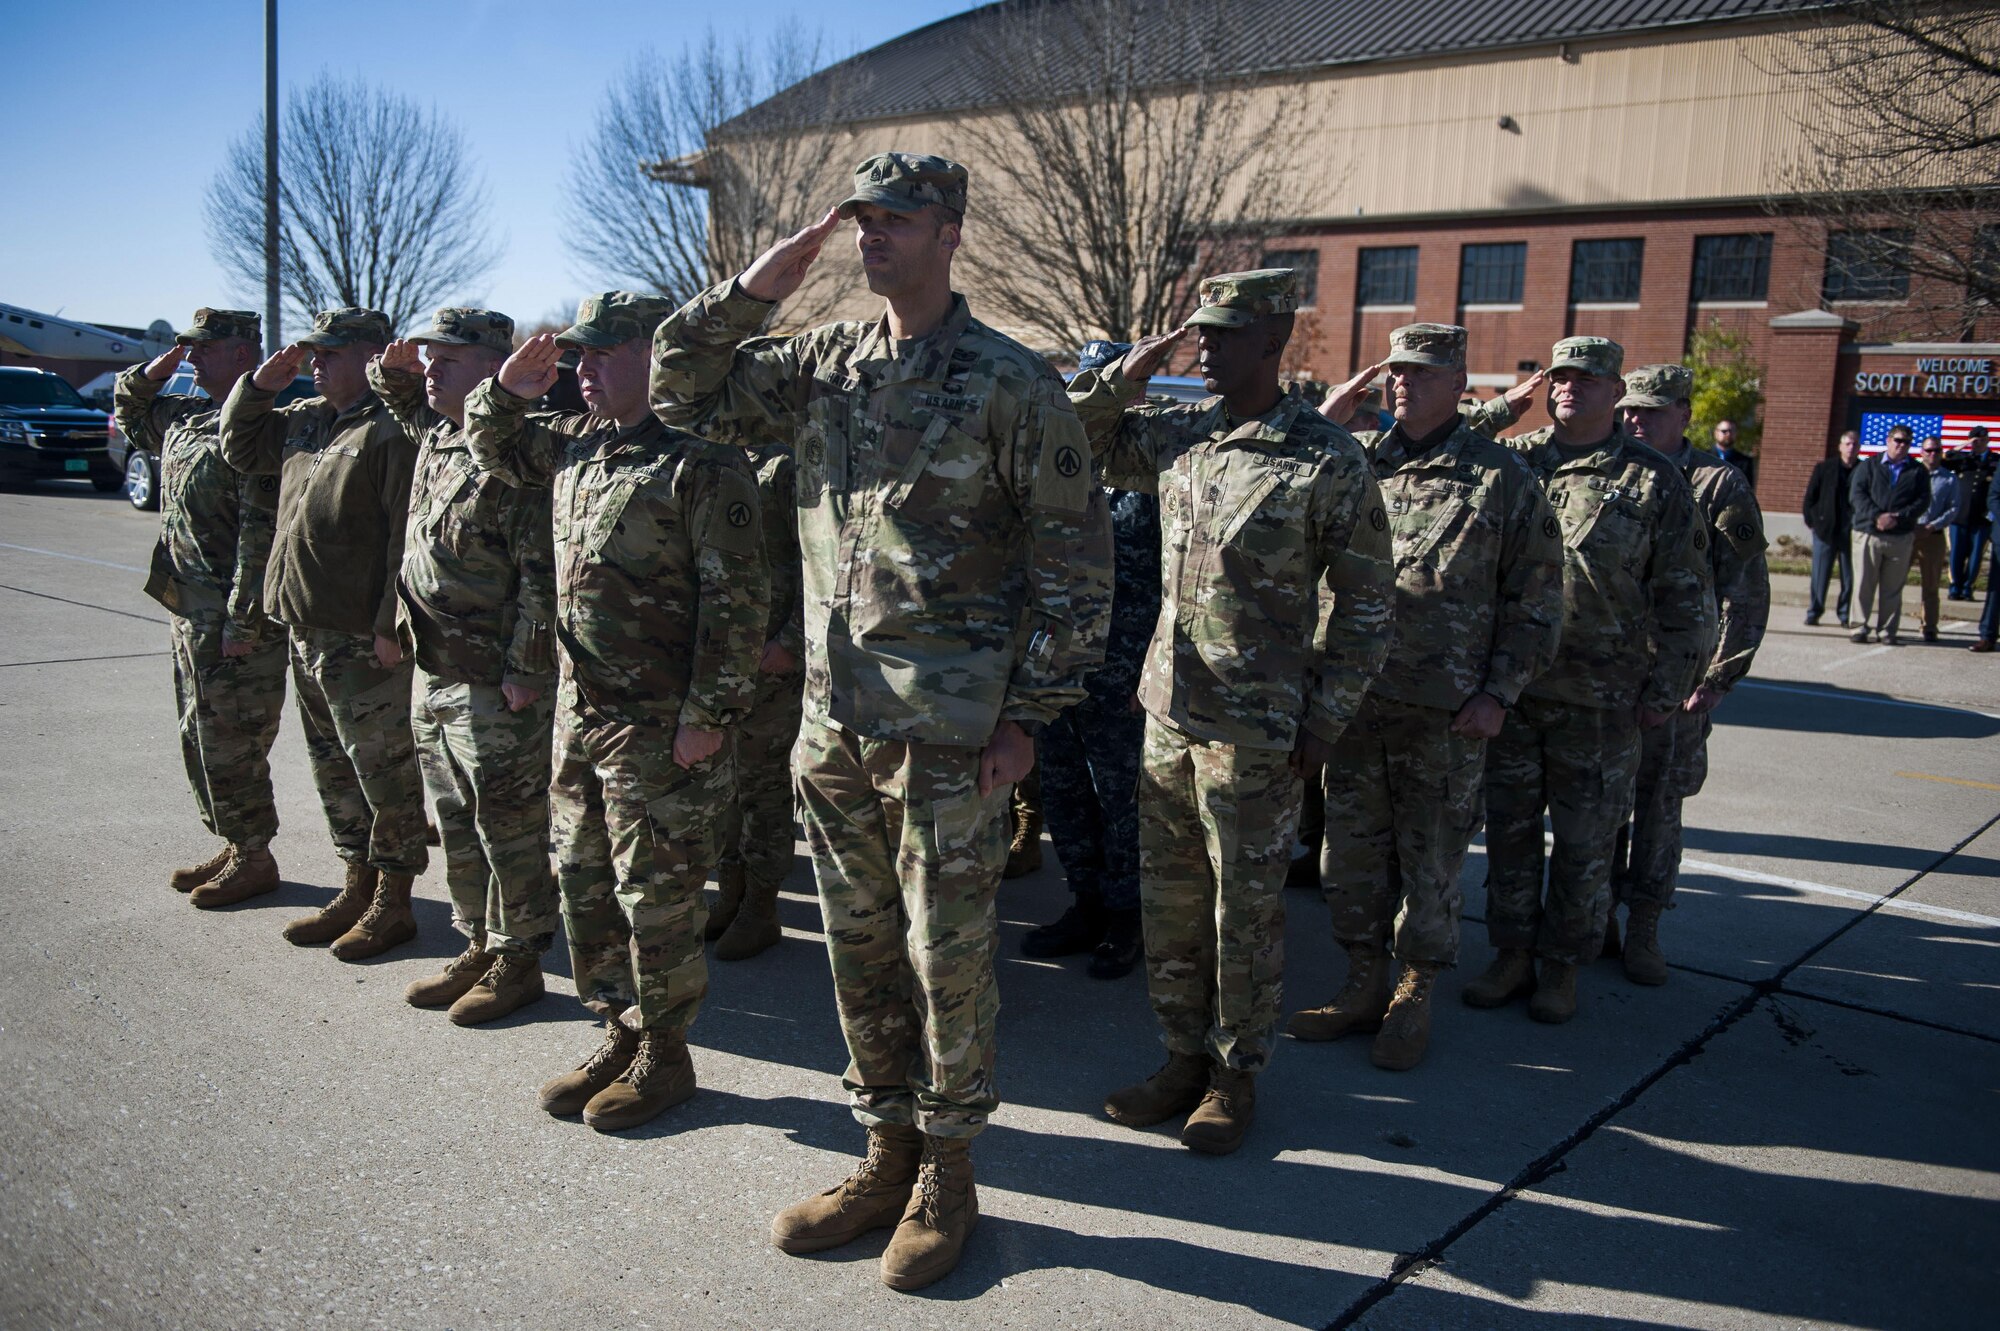 Soldiers stationed at Scott Air Force Base, Illinois salute during a dignified transfer ceremony for Pfc. Tyler Iubelt 21 Nov., 2016, at Scott Air Force Base, Illinois. Iubelt passed away on 12 Nov. while deployed to Bagram, Afghanistan. (U.S. Air Force photo by Staff Sgt. Clayton Lenhardt)